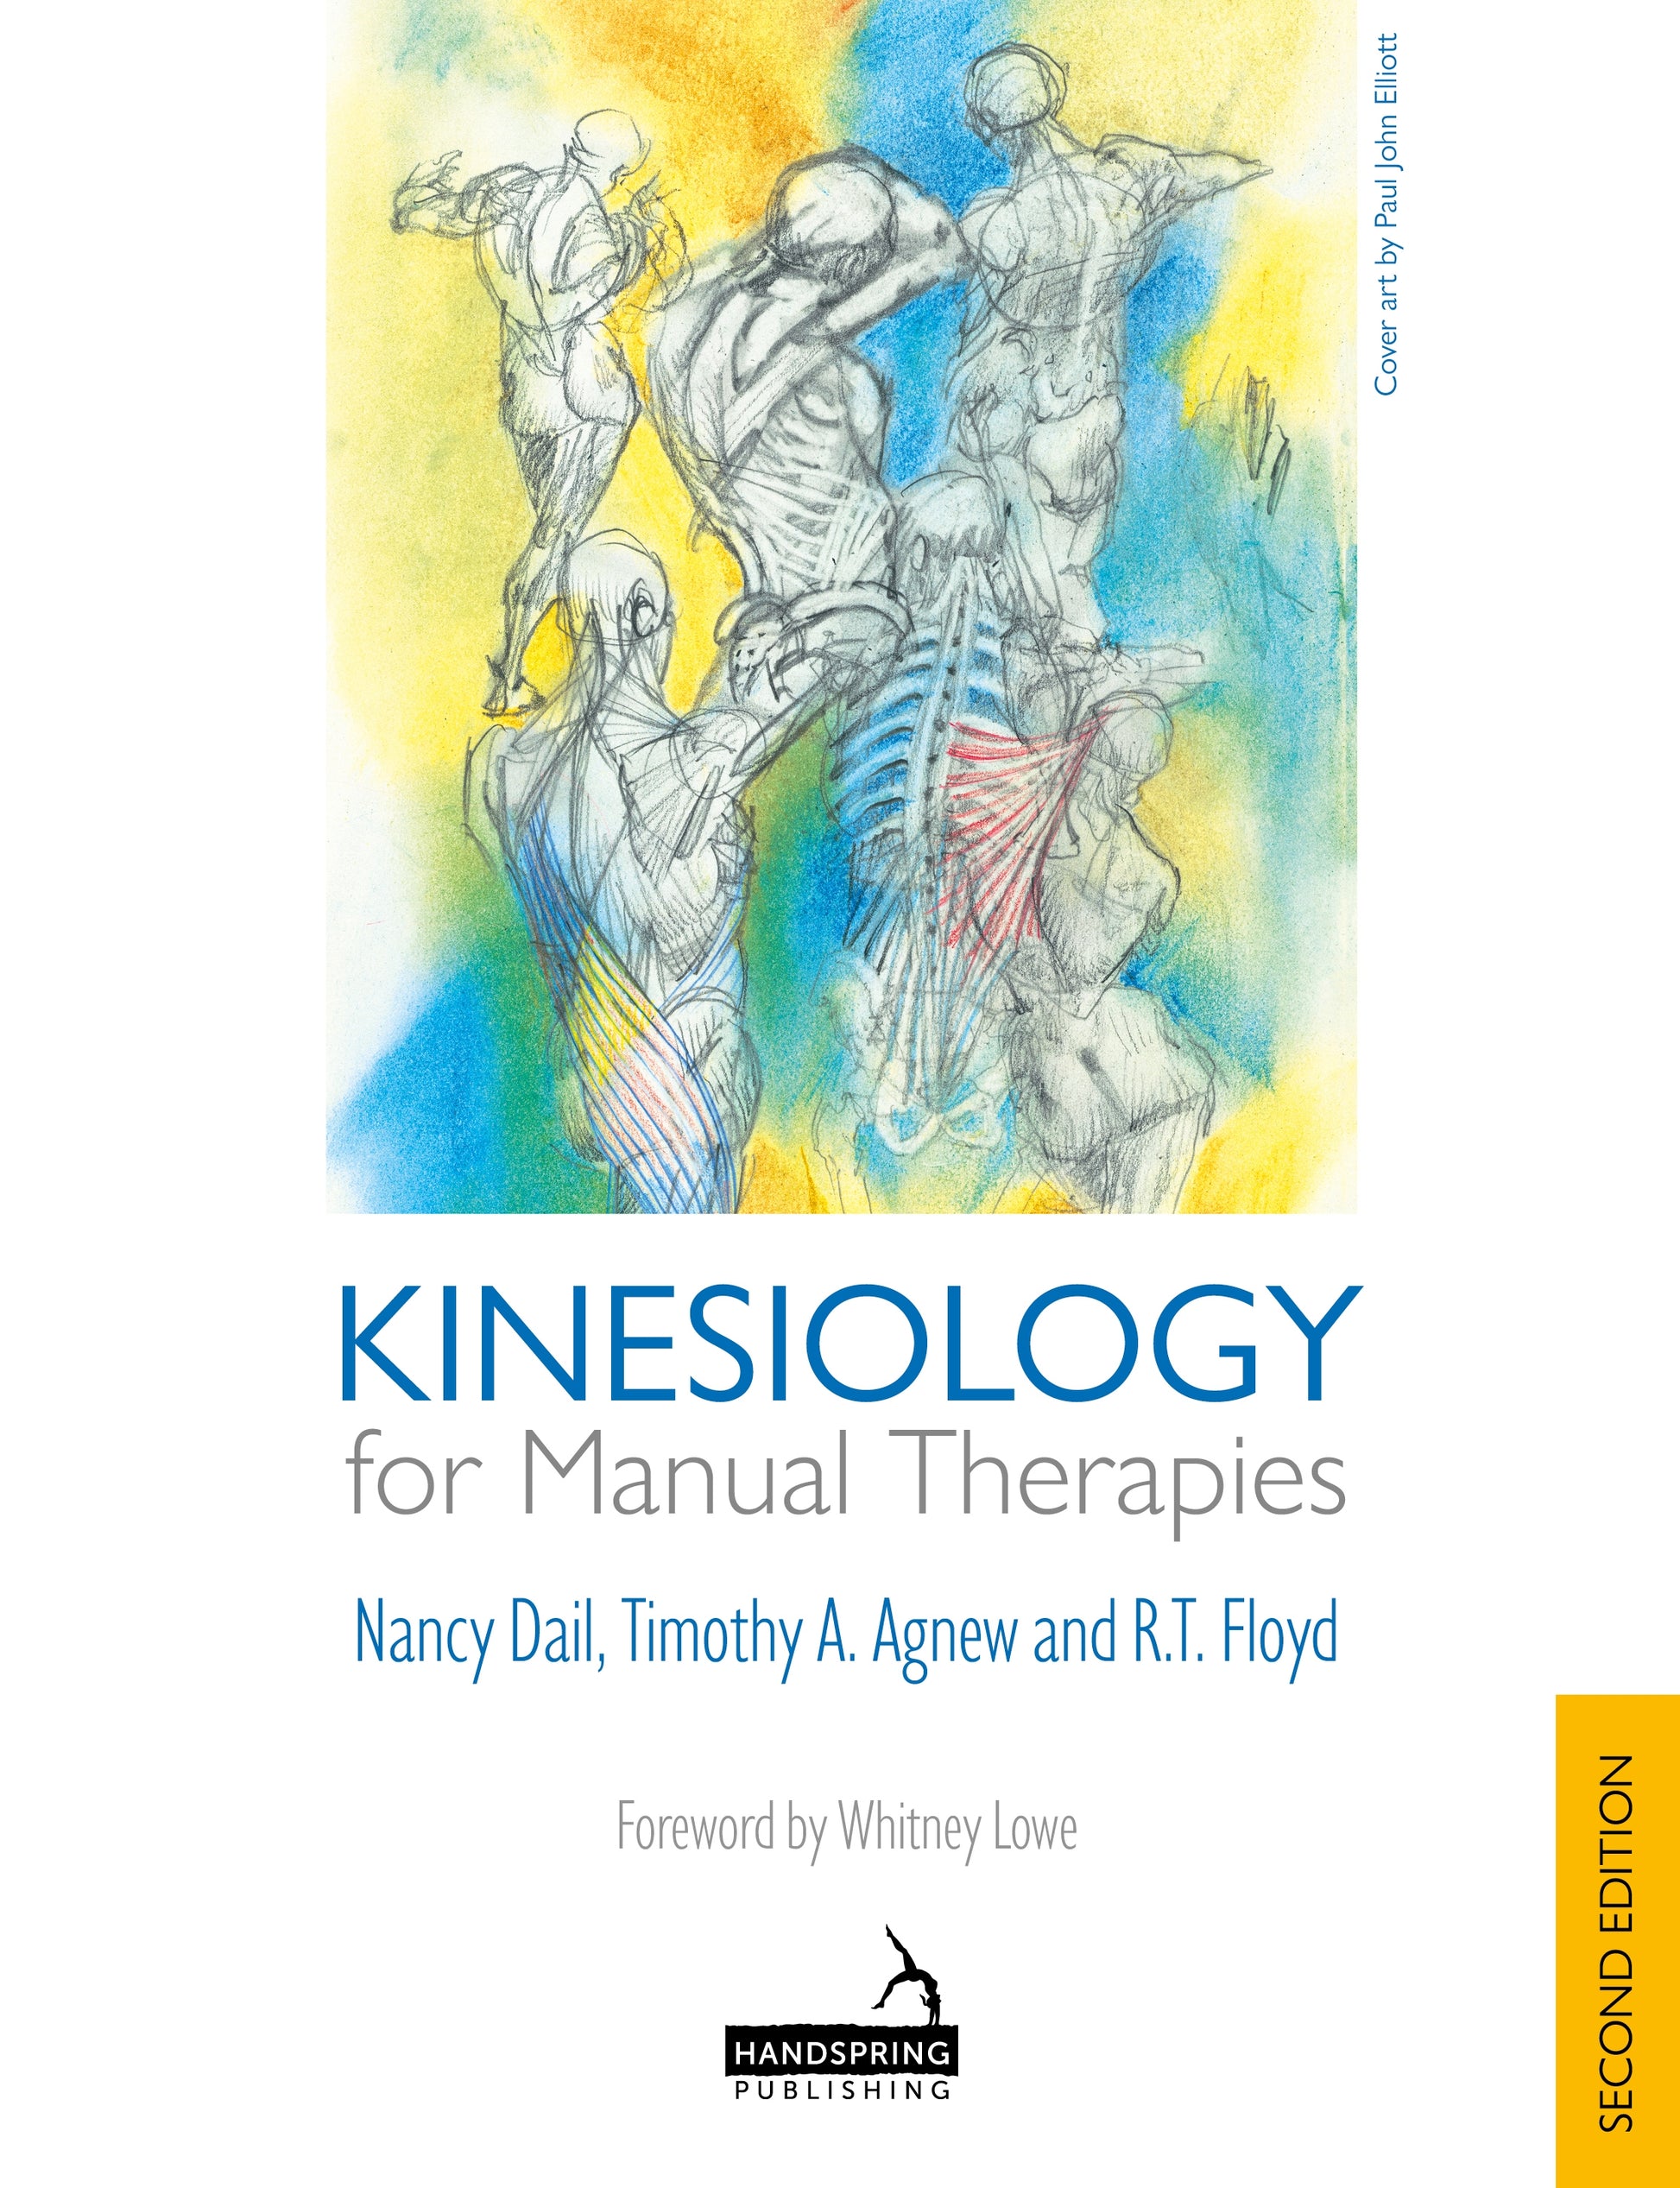 Kinesiology for Manual Therapies, 2nd Edition by Nancy Dail, Timothy Agnew, R. T. Floyd